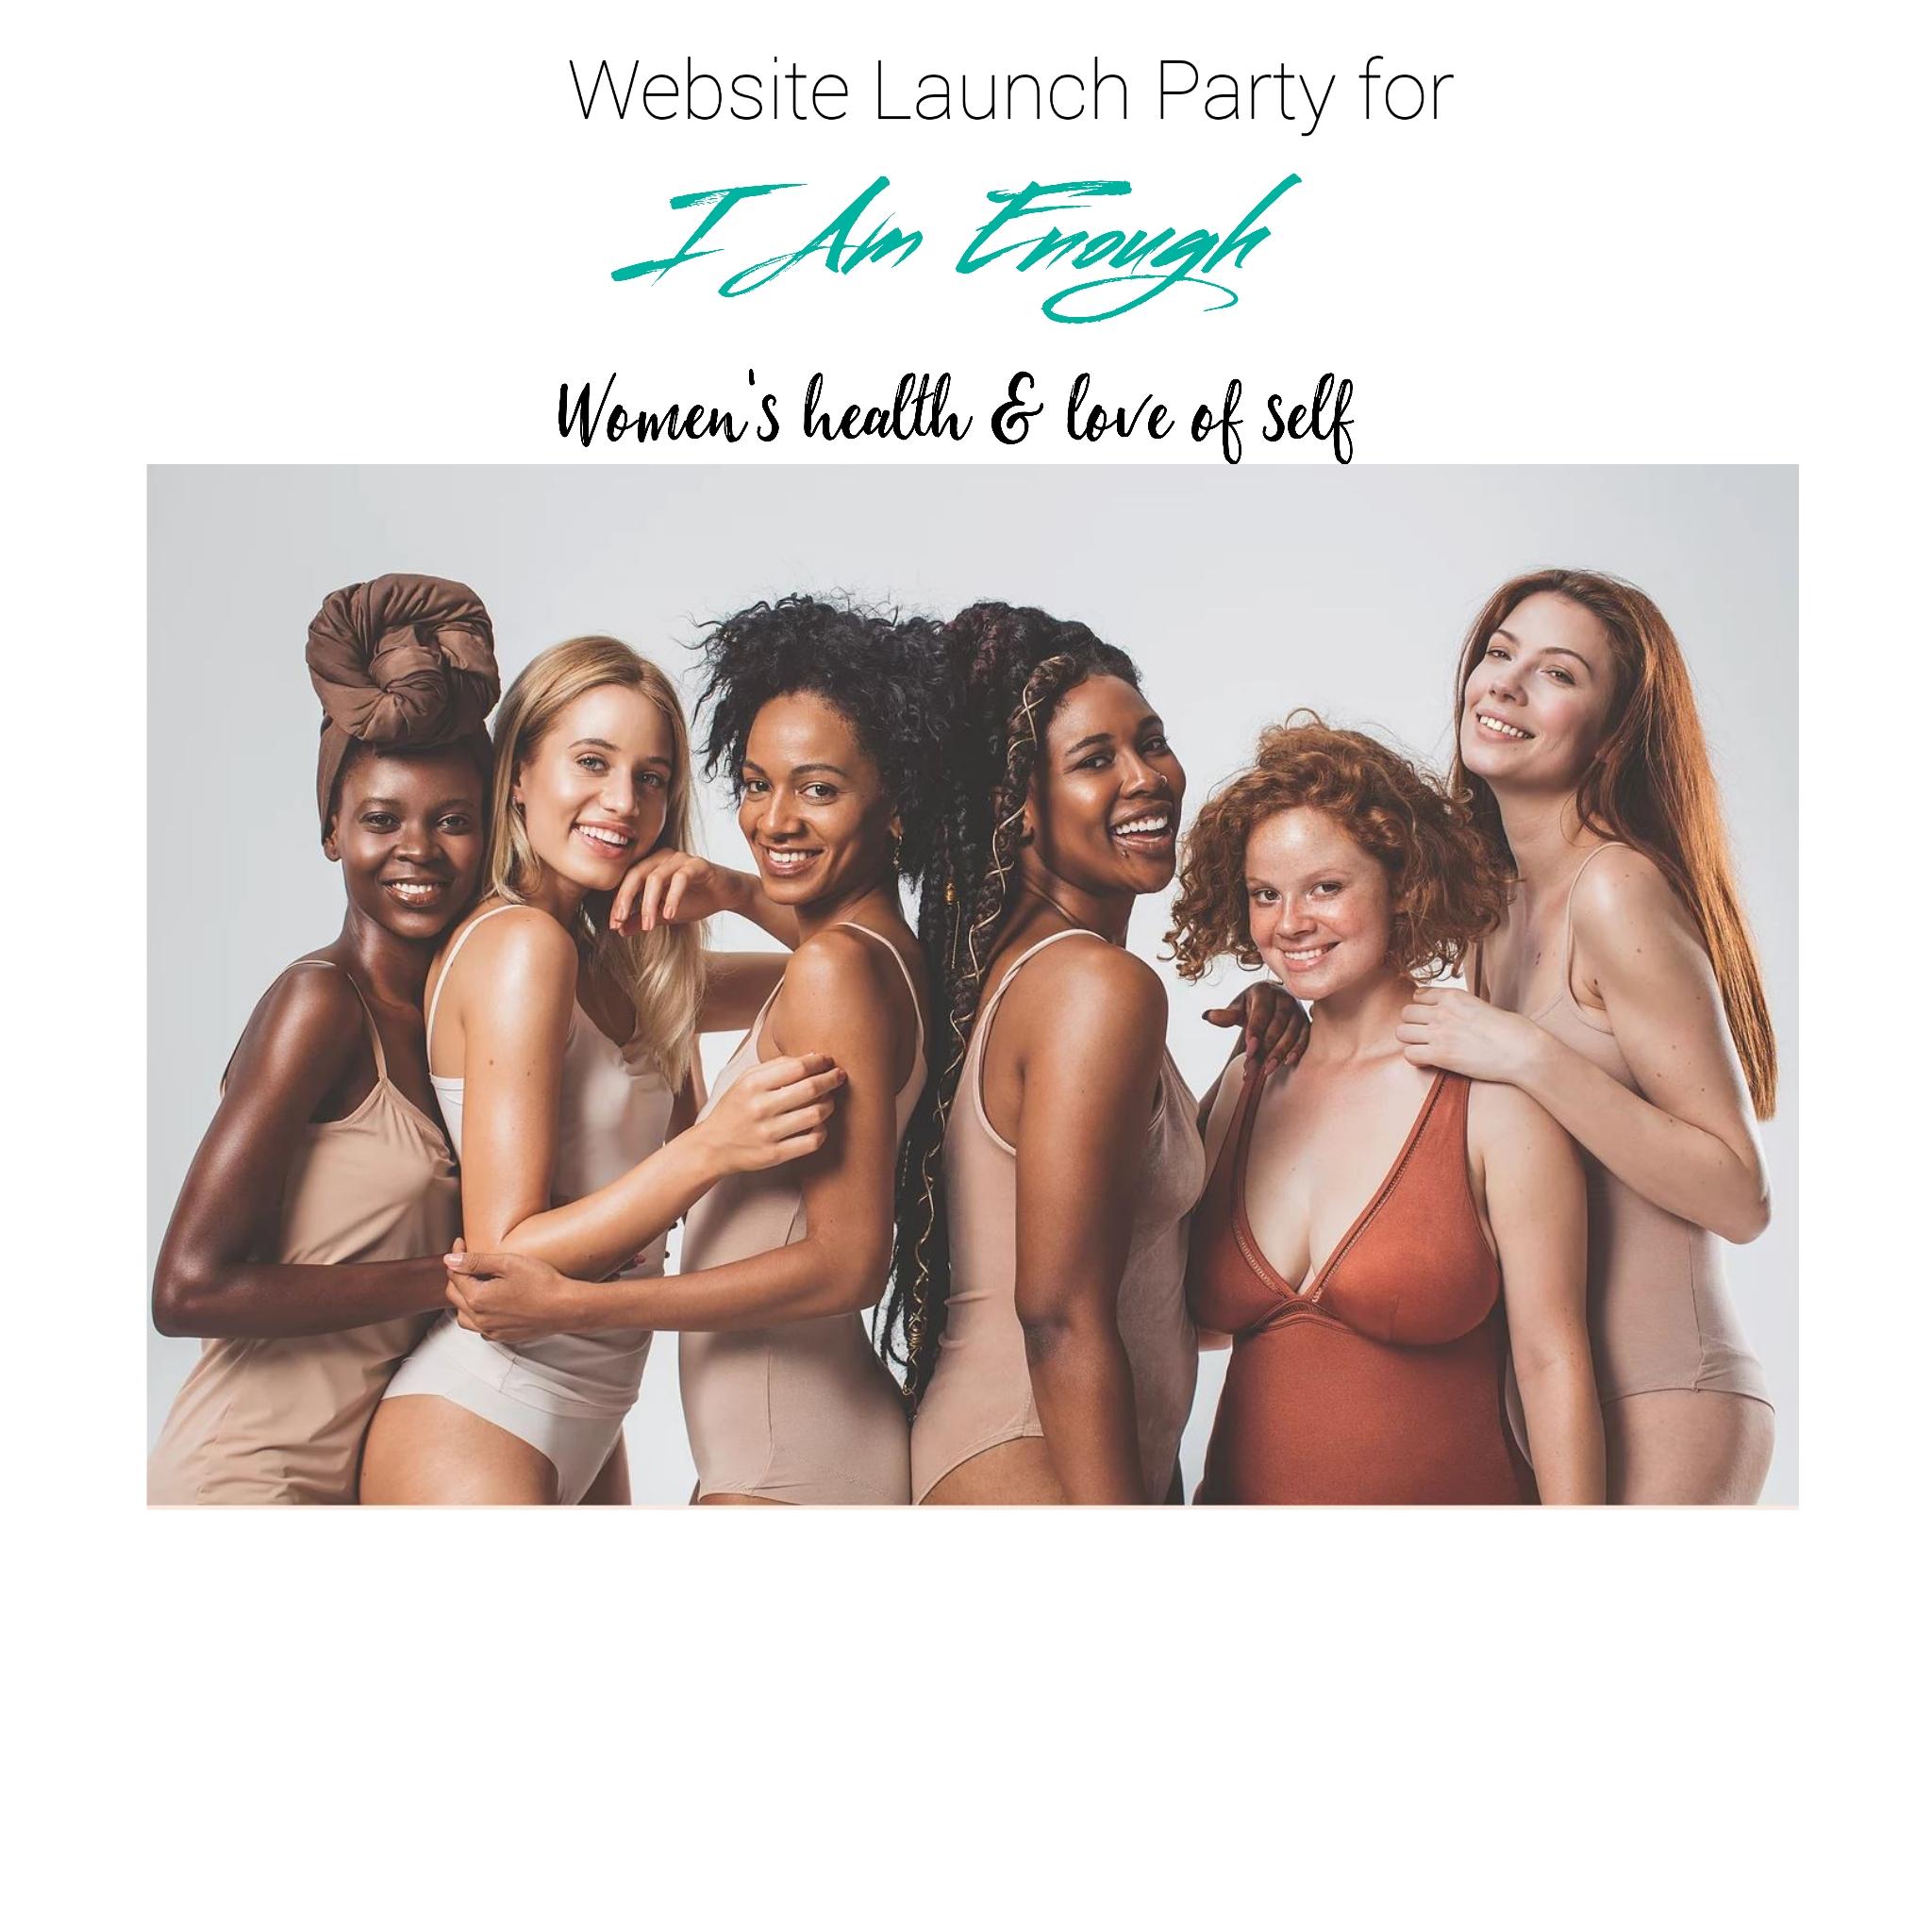 Website Launch Party for I AM ENOUGH Women's Health & Love of Self